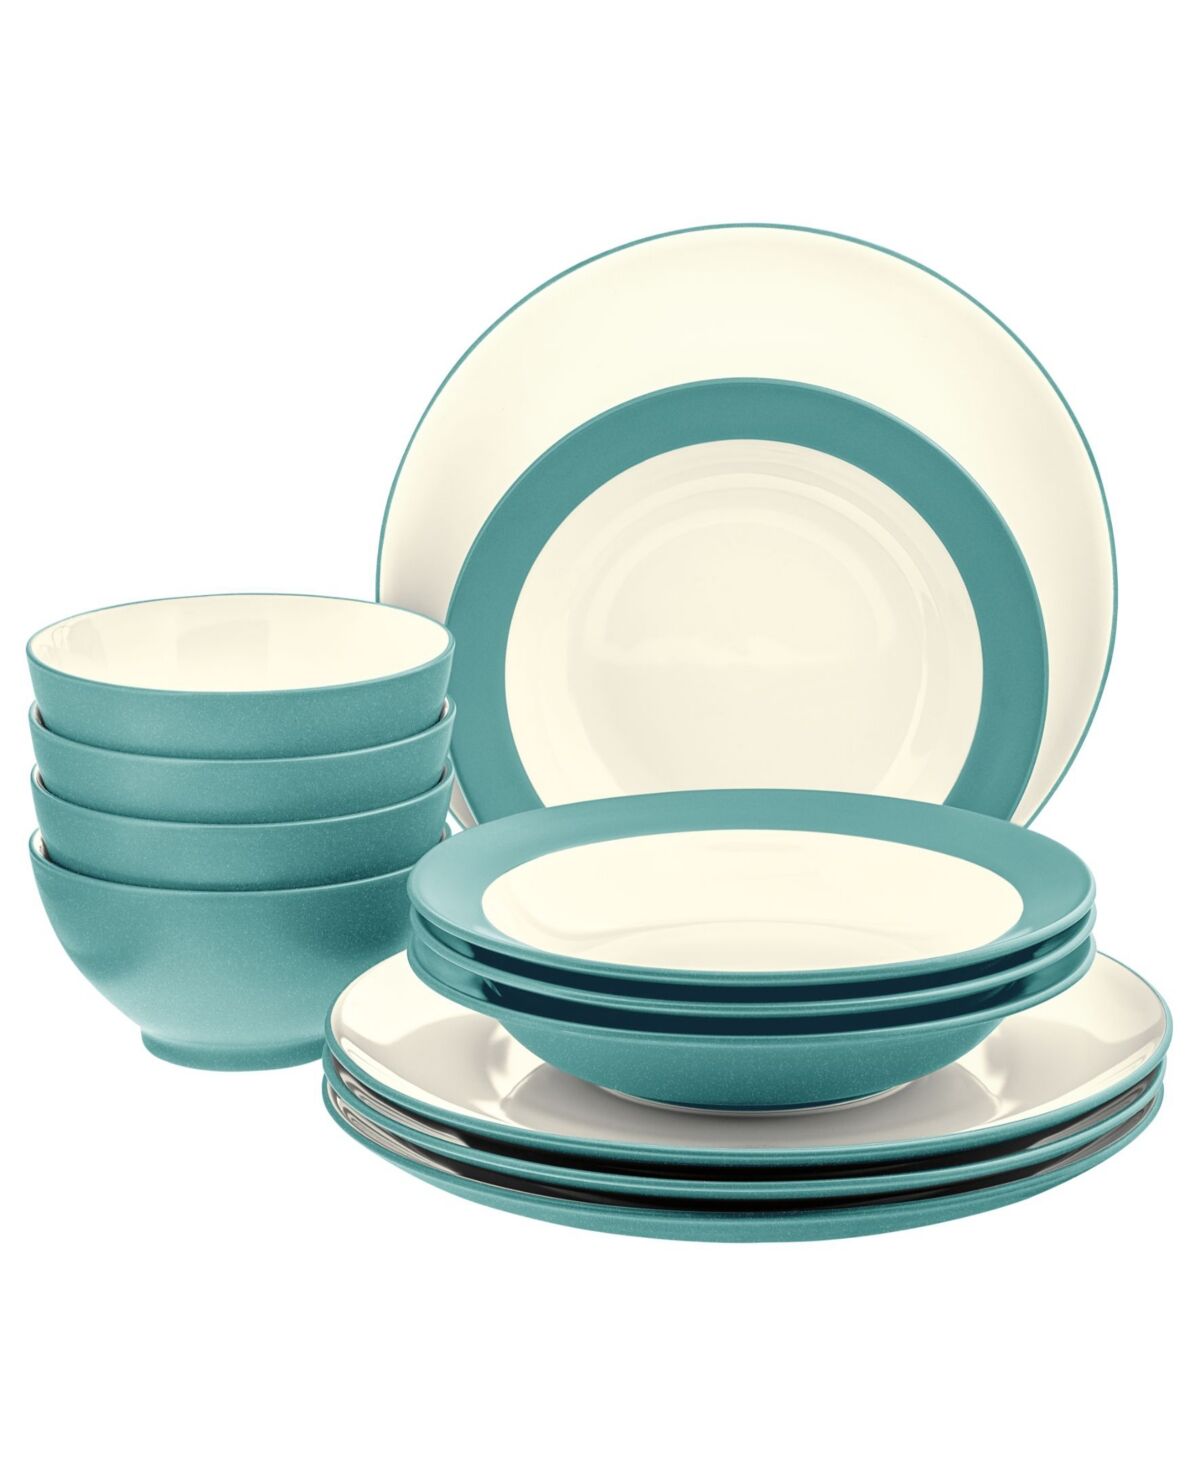 Noritake Colorwave Coupe 12-Piece Dinnerware Set, Service for 4, Created for Macy's - Turquoise